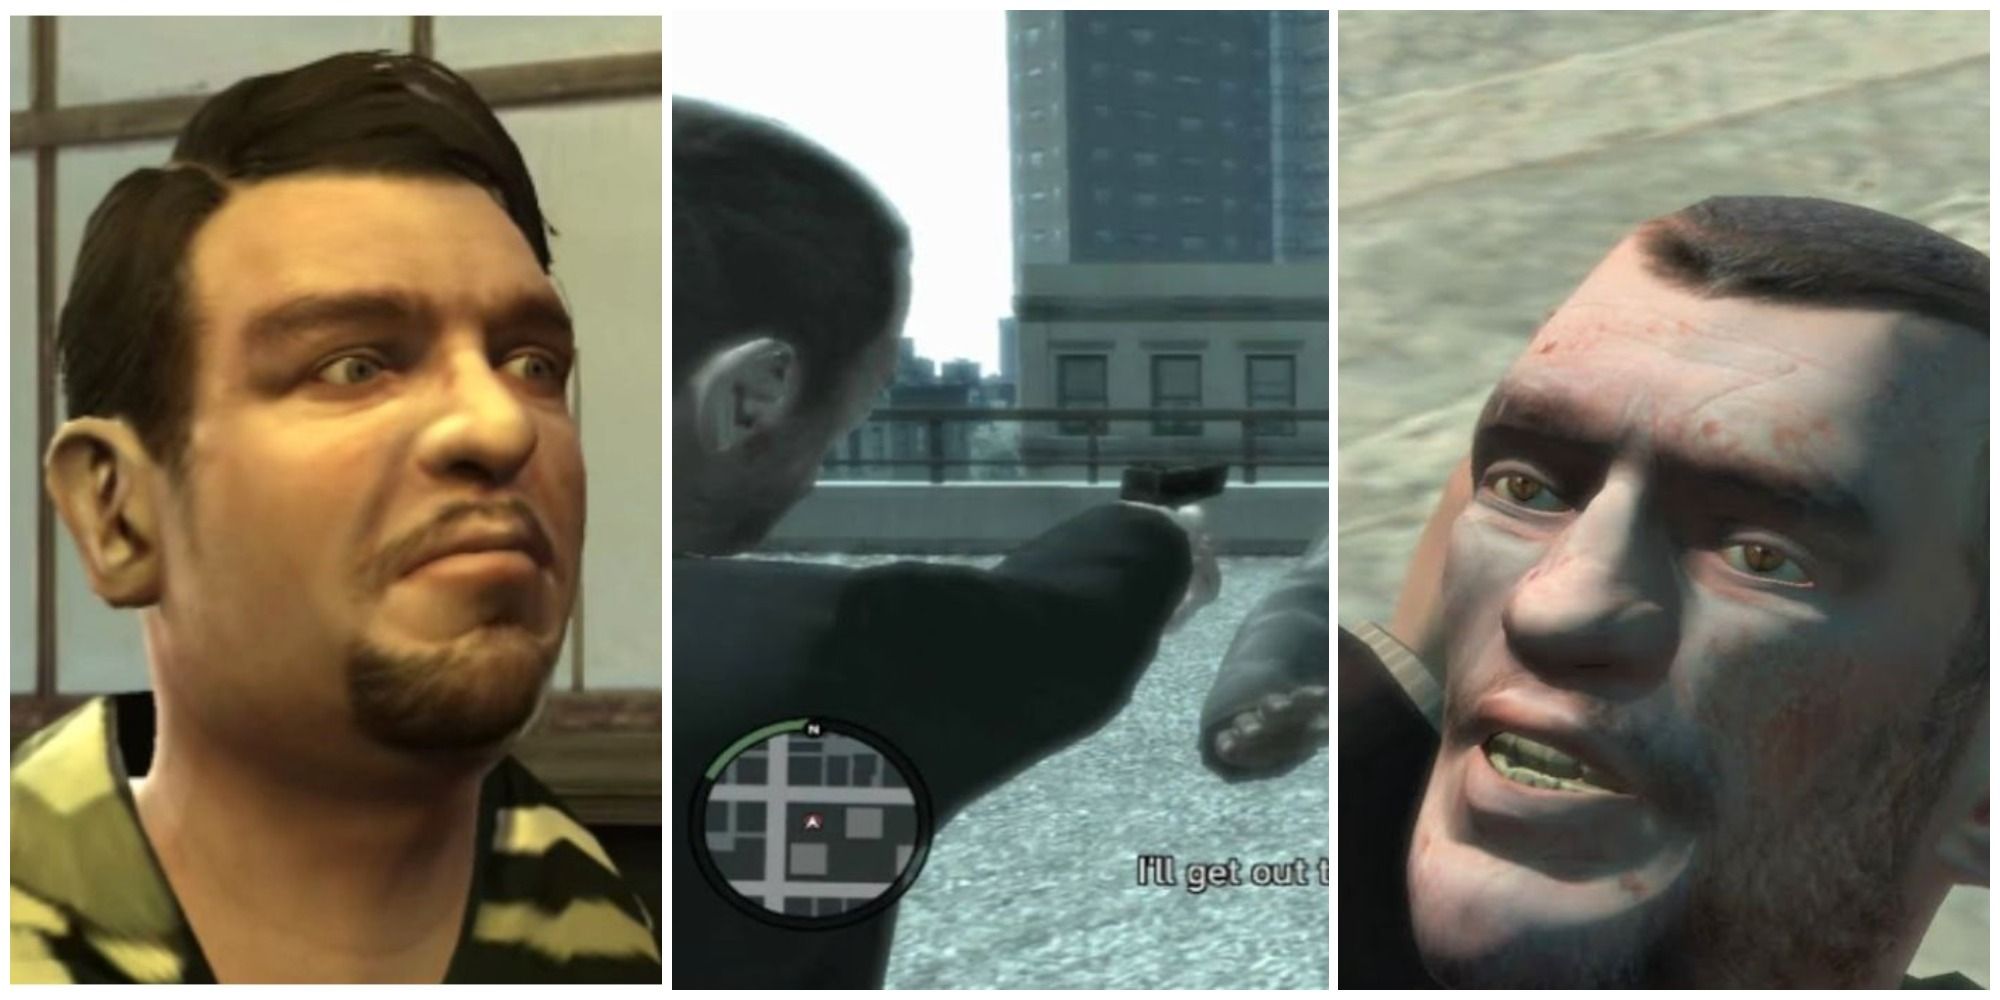 I got a copy of GTA IV in mint condition that still hasn't had the